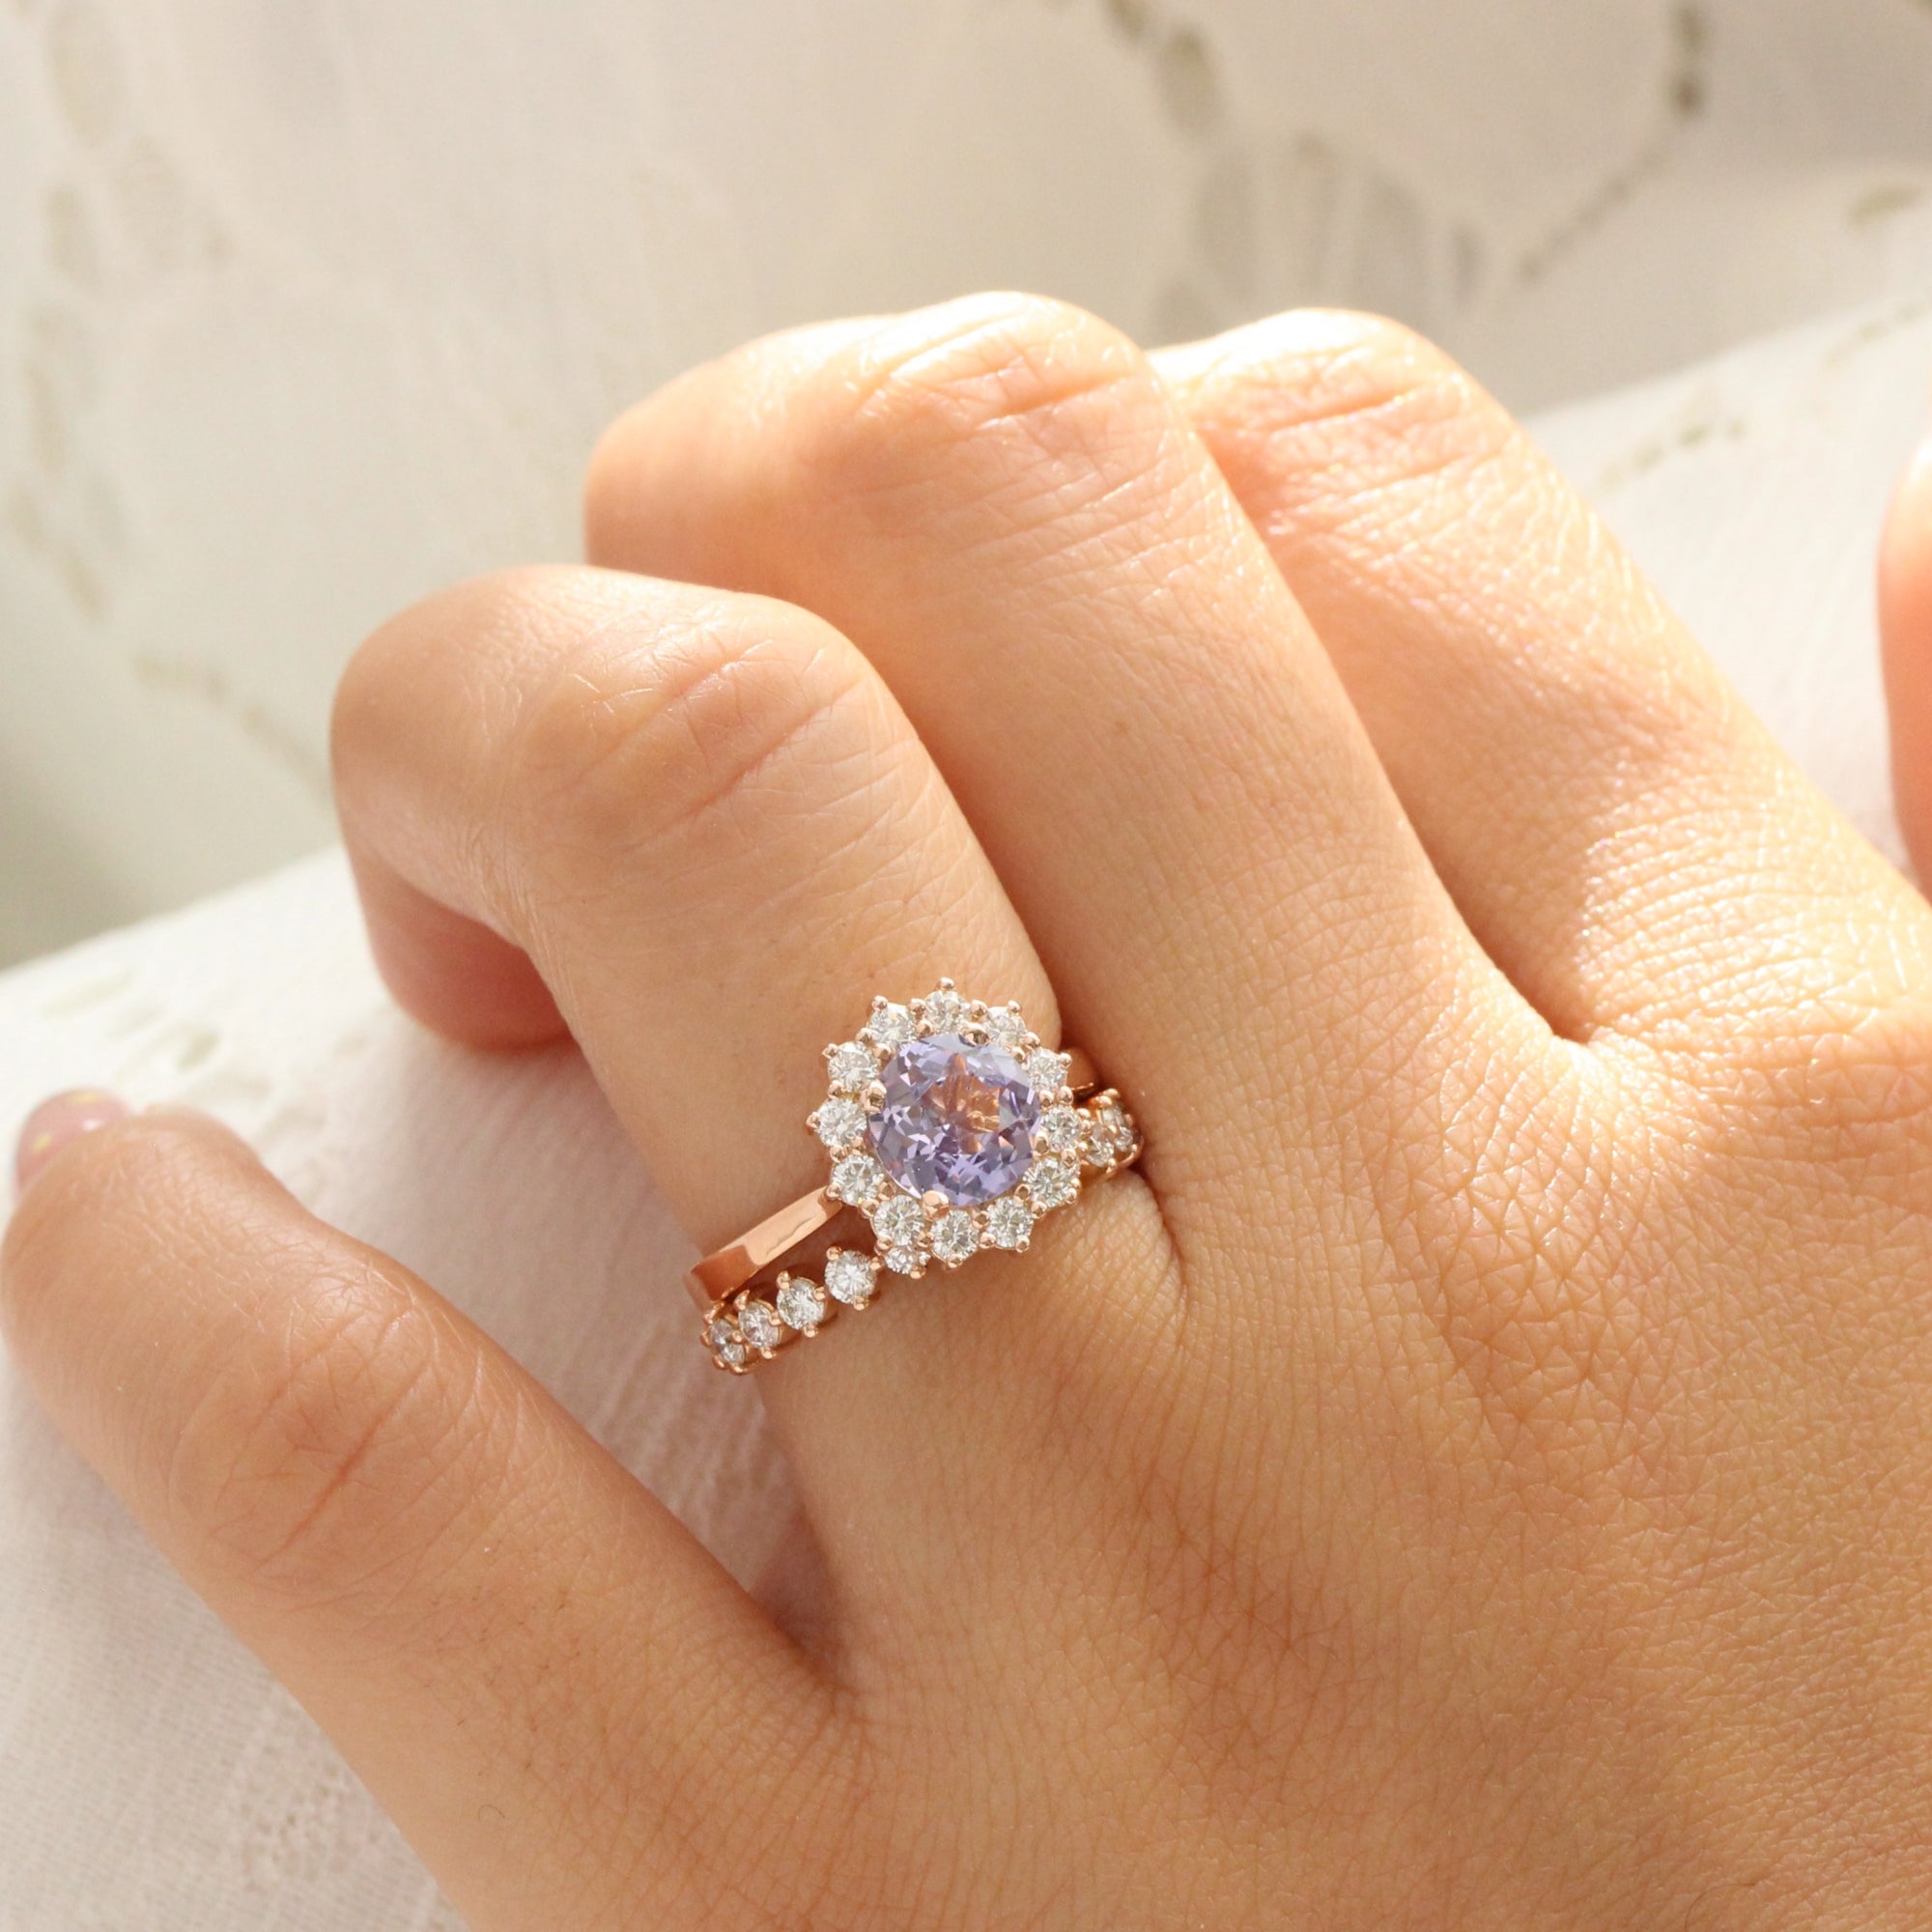 round lavender sapphire ring rose gold large halo diamond engagement ring la more design jewelry